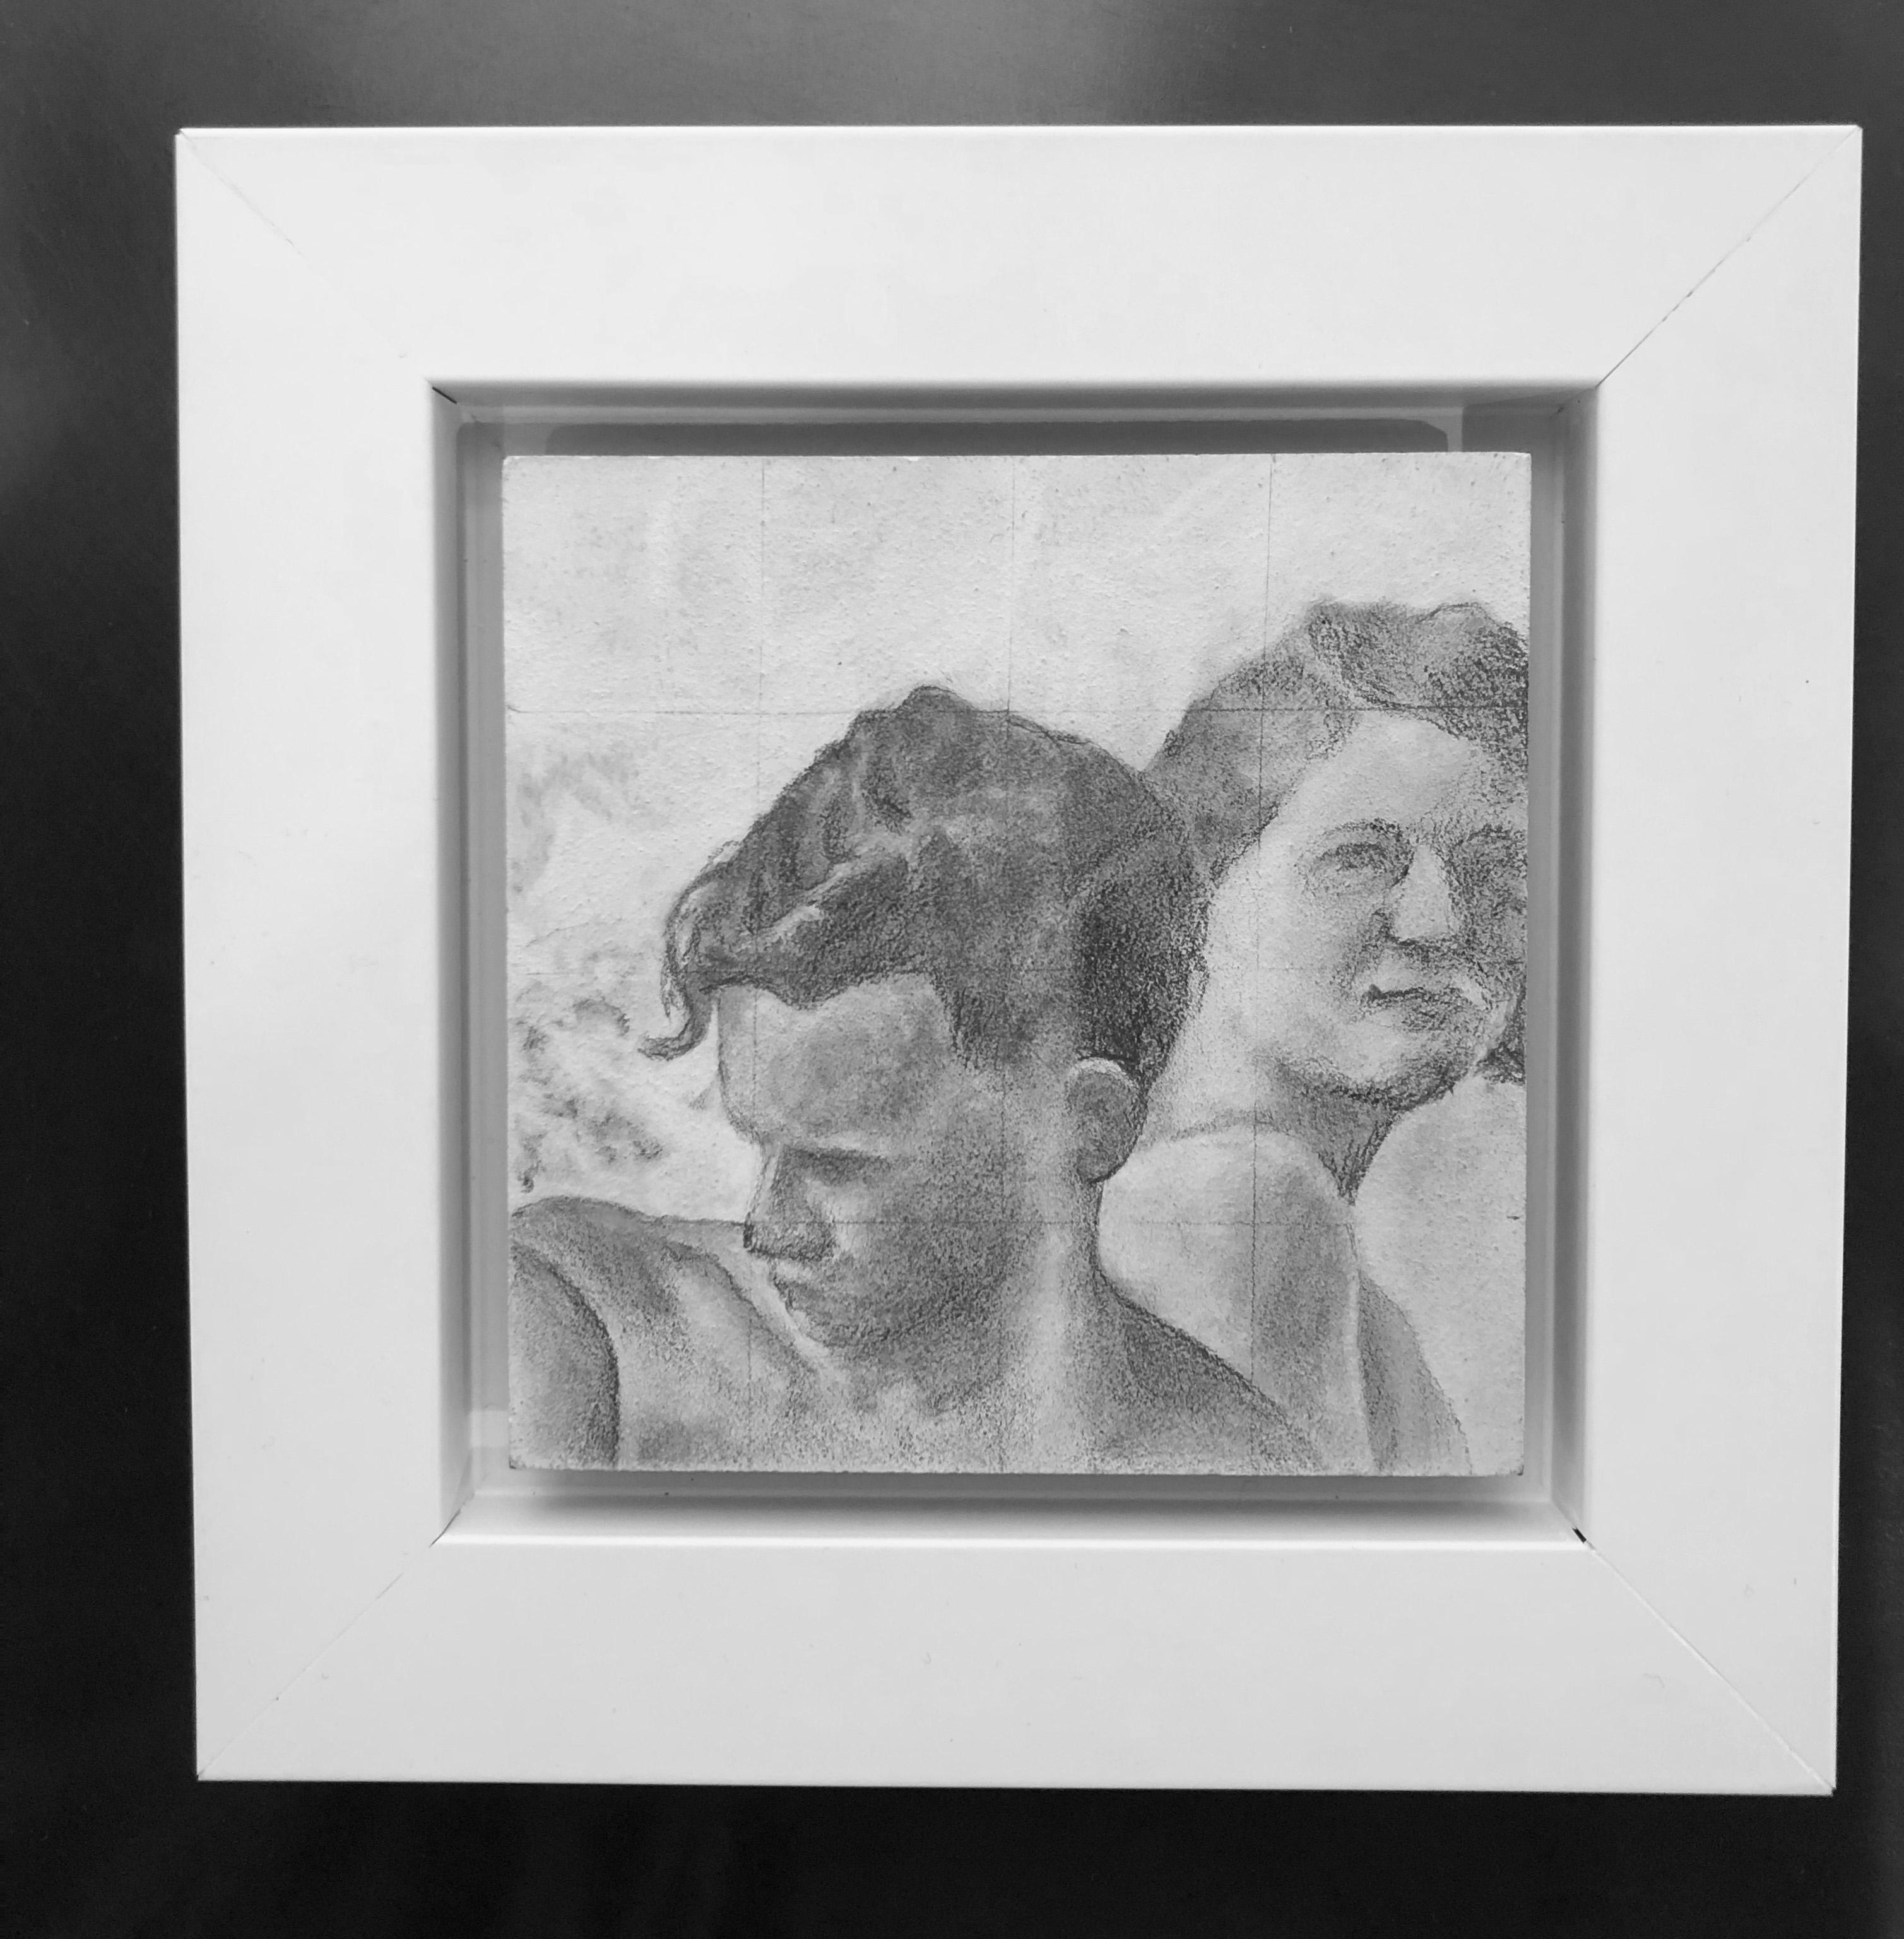 Reticent - Original Graphite Drawing on Panel, Two People at the Beach Circa '50 - Art by Rick Sindt